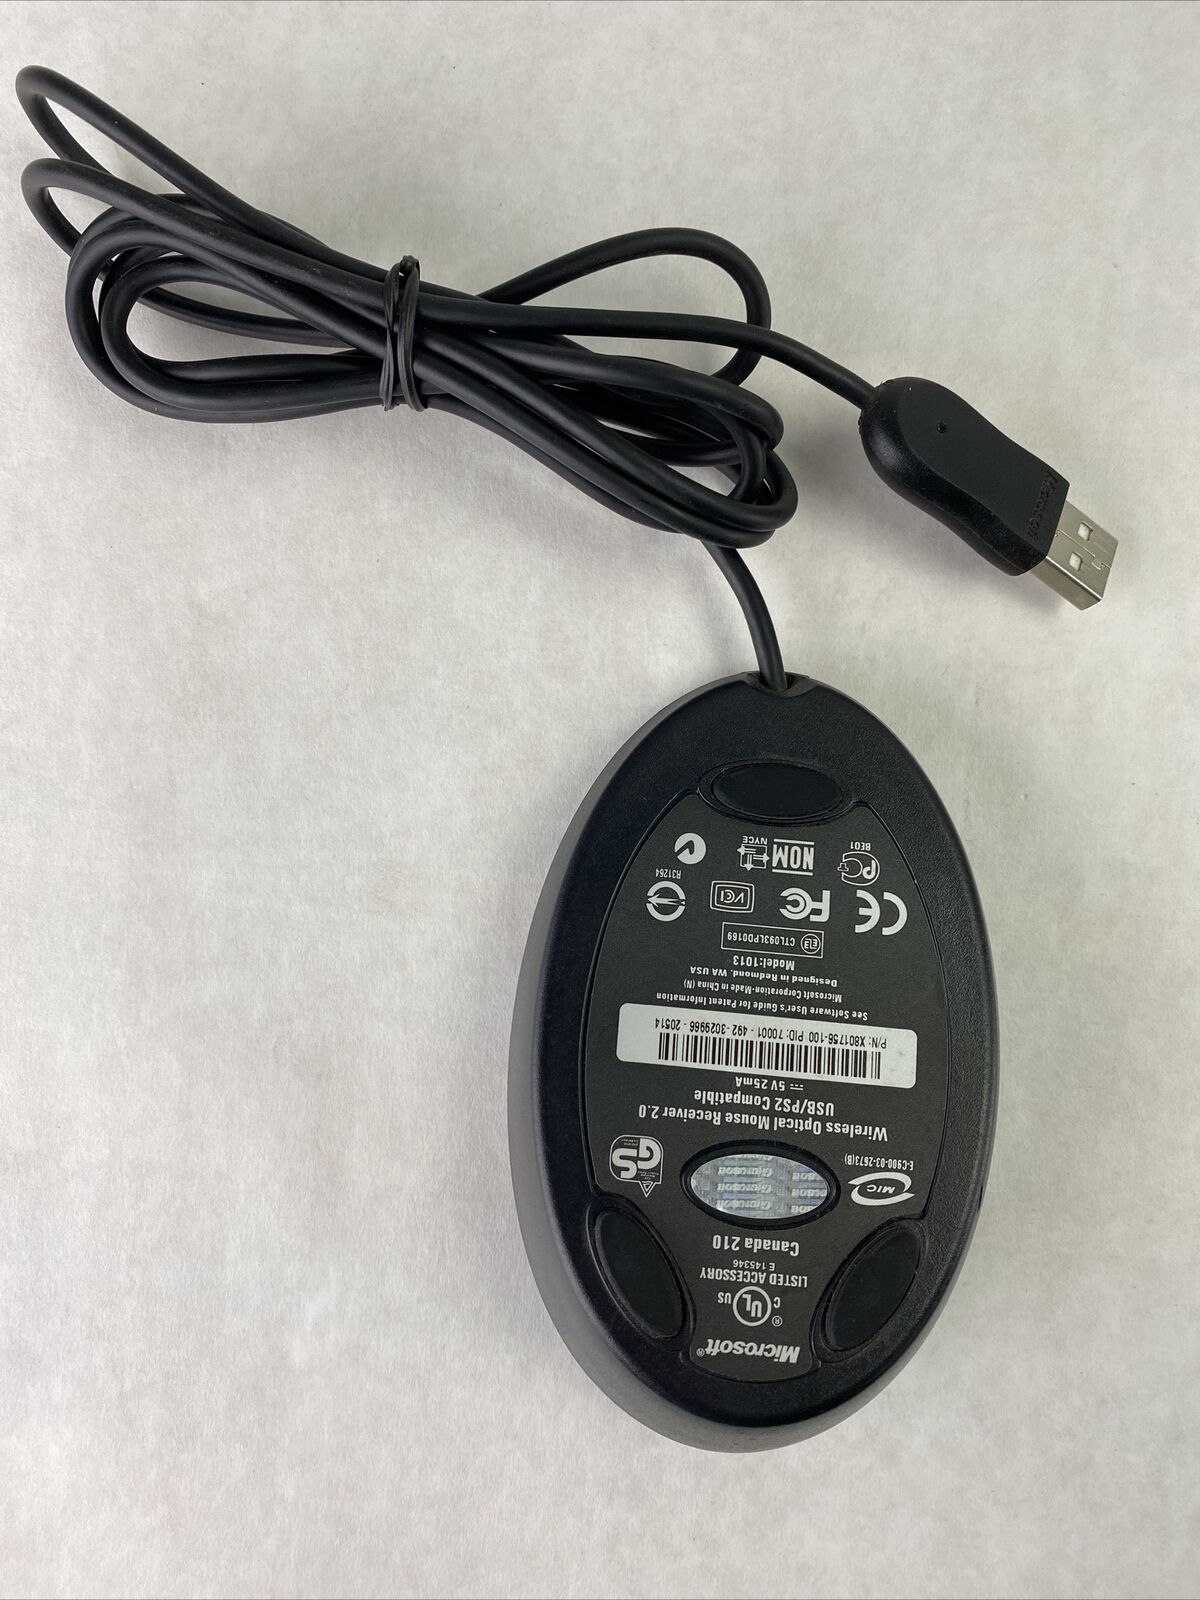 Microsoft 1013 X801756-103 USB Wireless Optical Mouse Receiver 2.0 ONLY